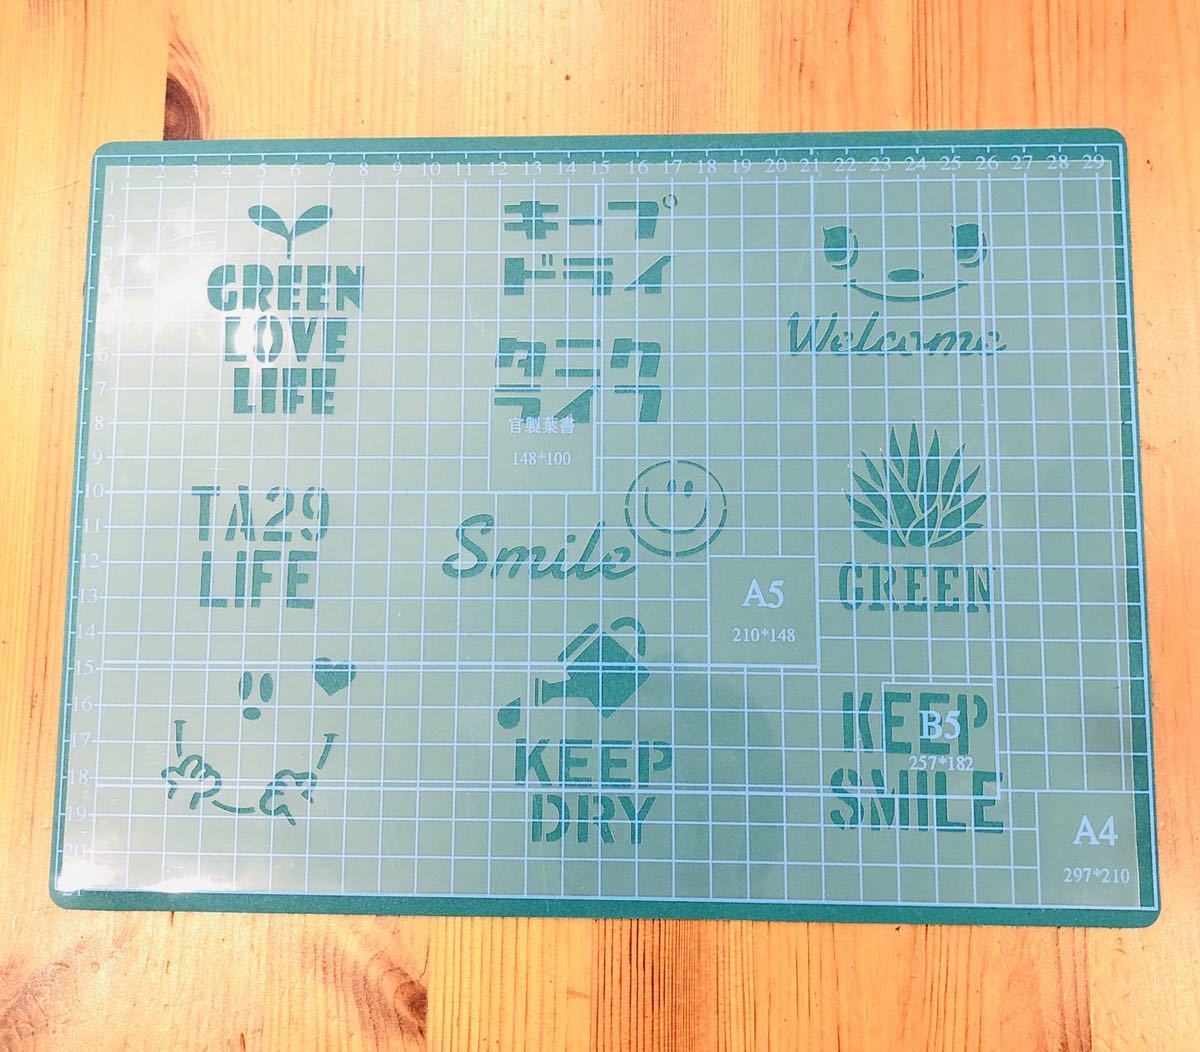 No.203 stencil seat Smile many meat TA29 green garden wellcome lime can remake can DIY stencil plate 